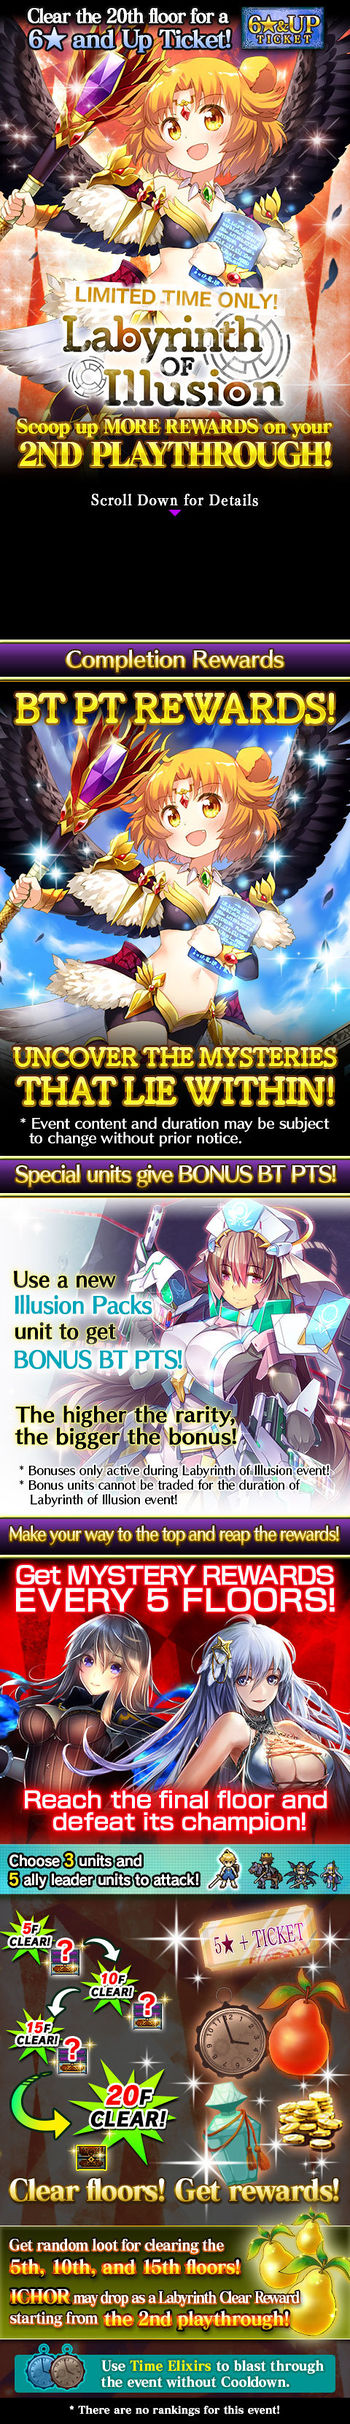 Labyrinth of Illusion release.jpg